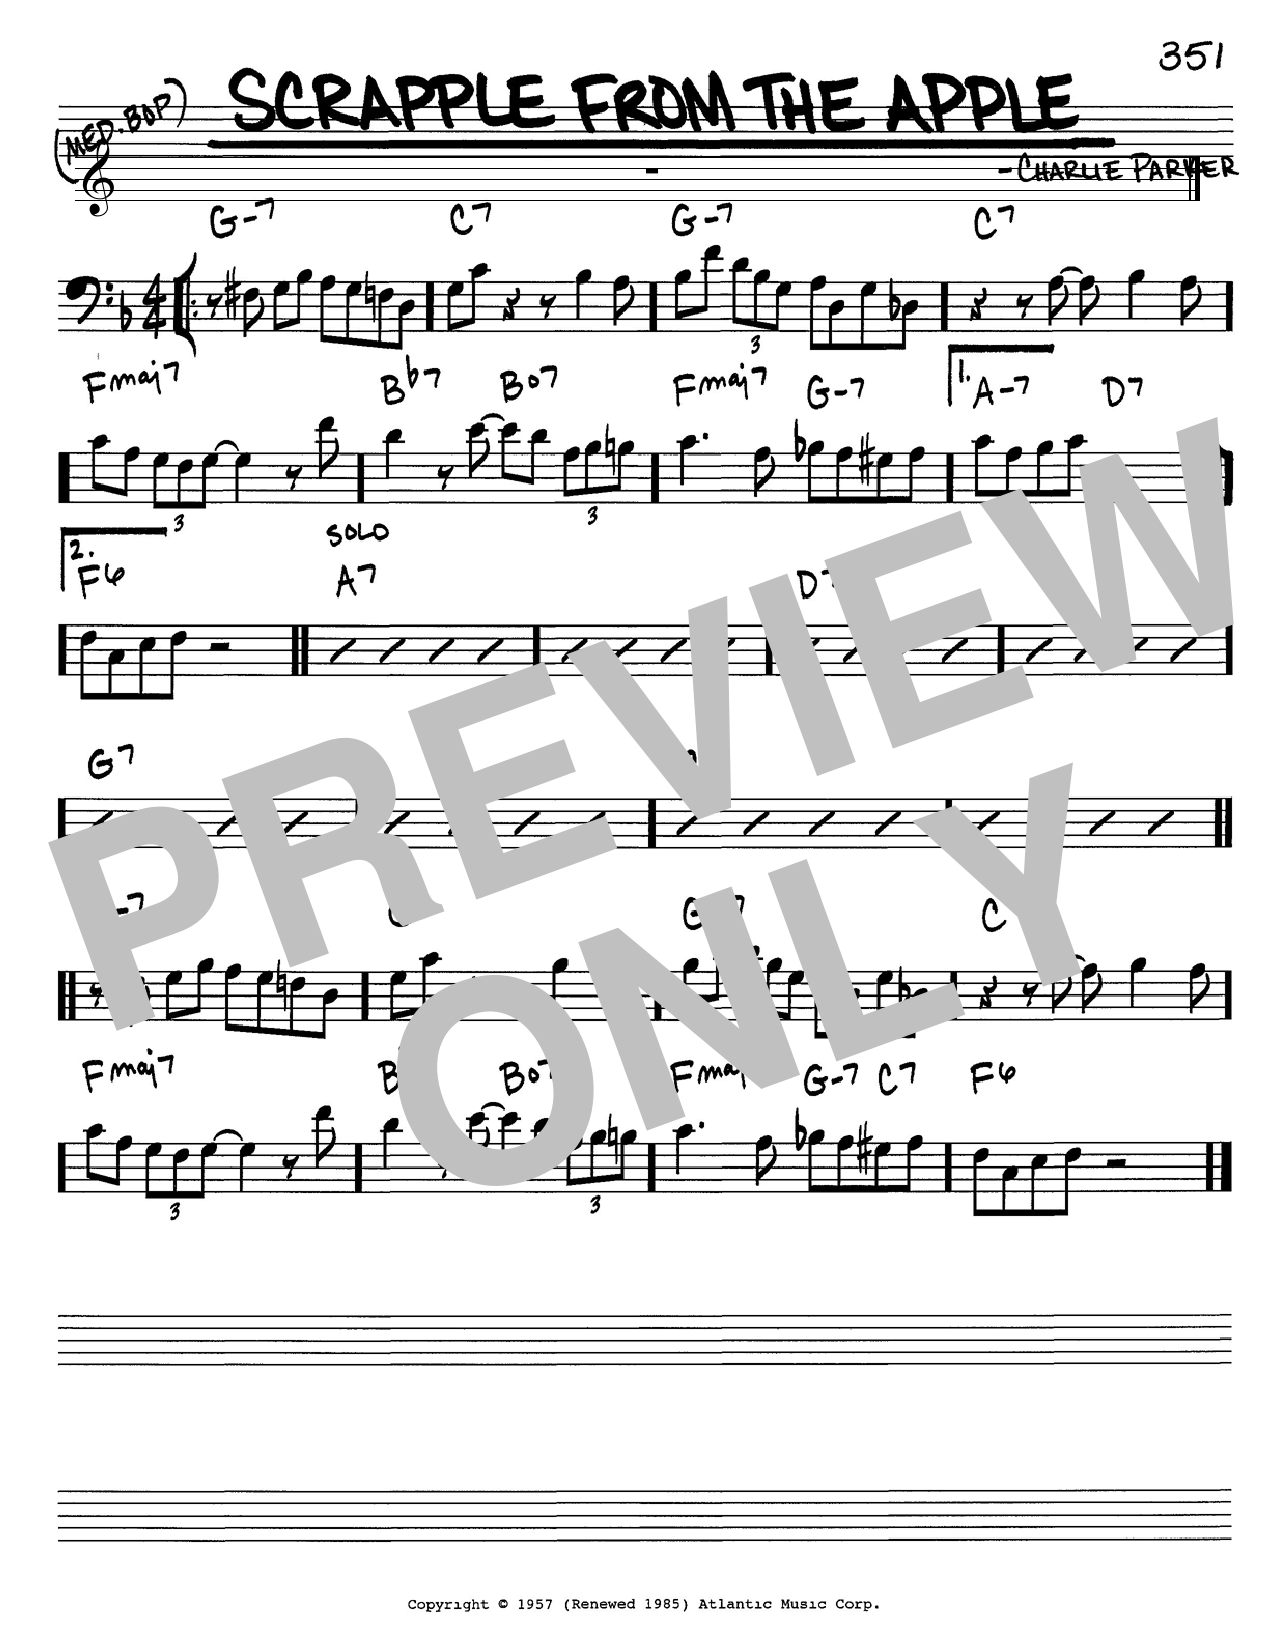 Charlie Parker Scrapple From The Apple sheet music notes and chords. Download Printable PDF.